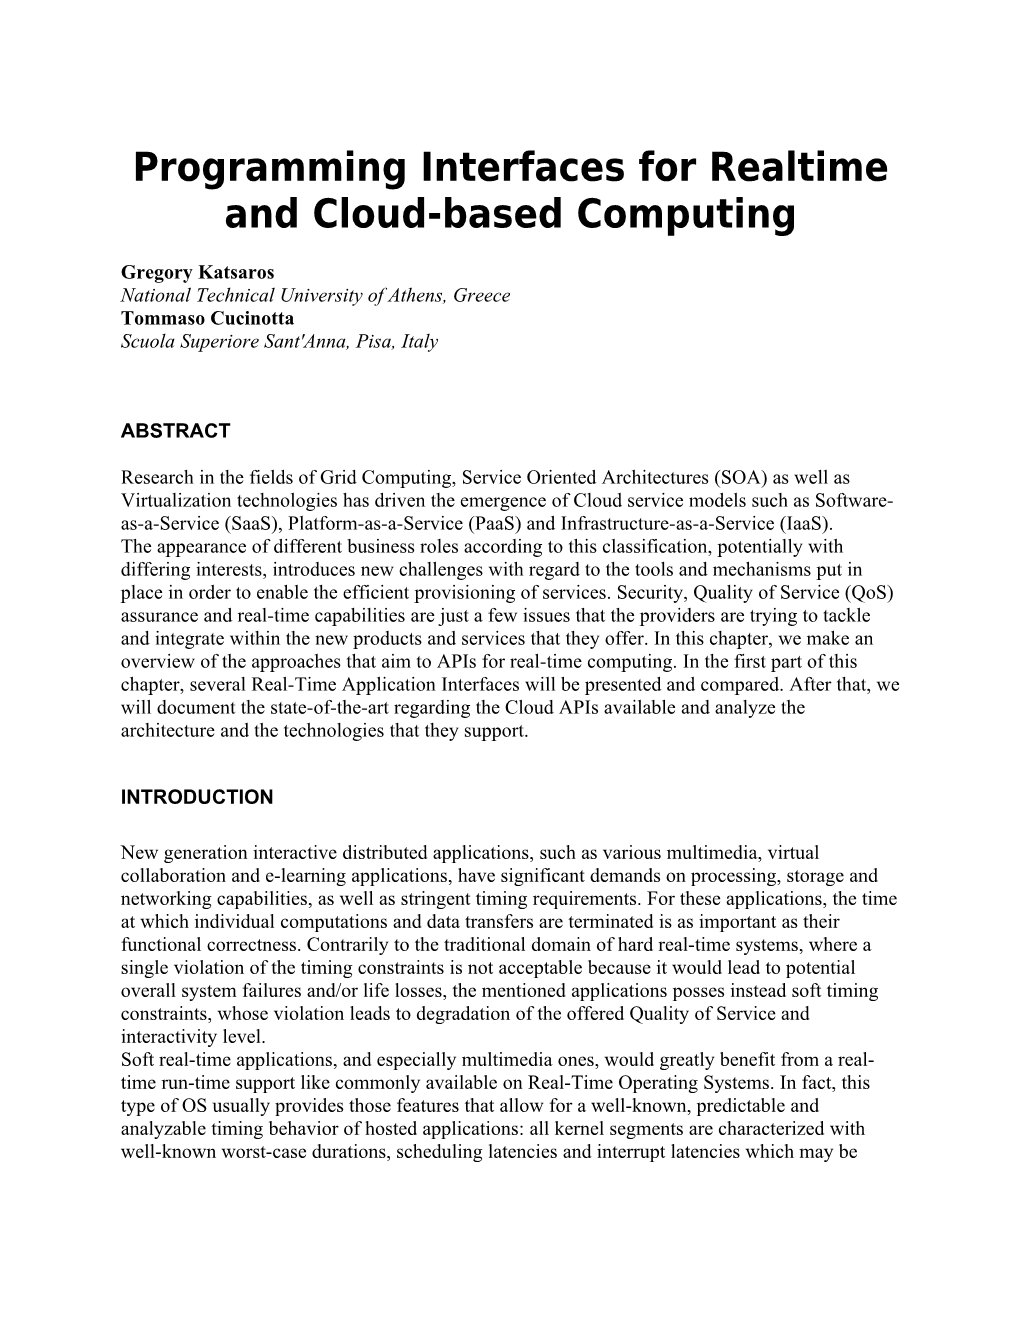 Programming Interfaces for Realtime and Cloud-Based Computing